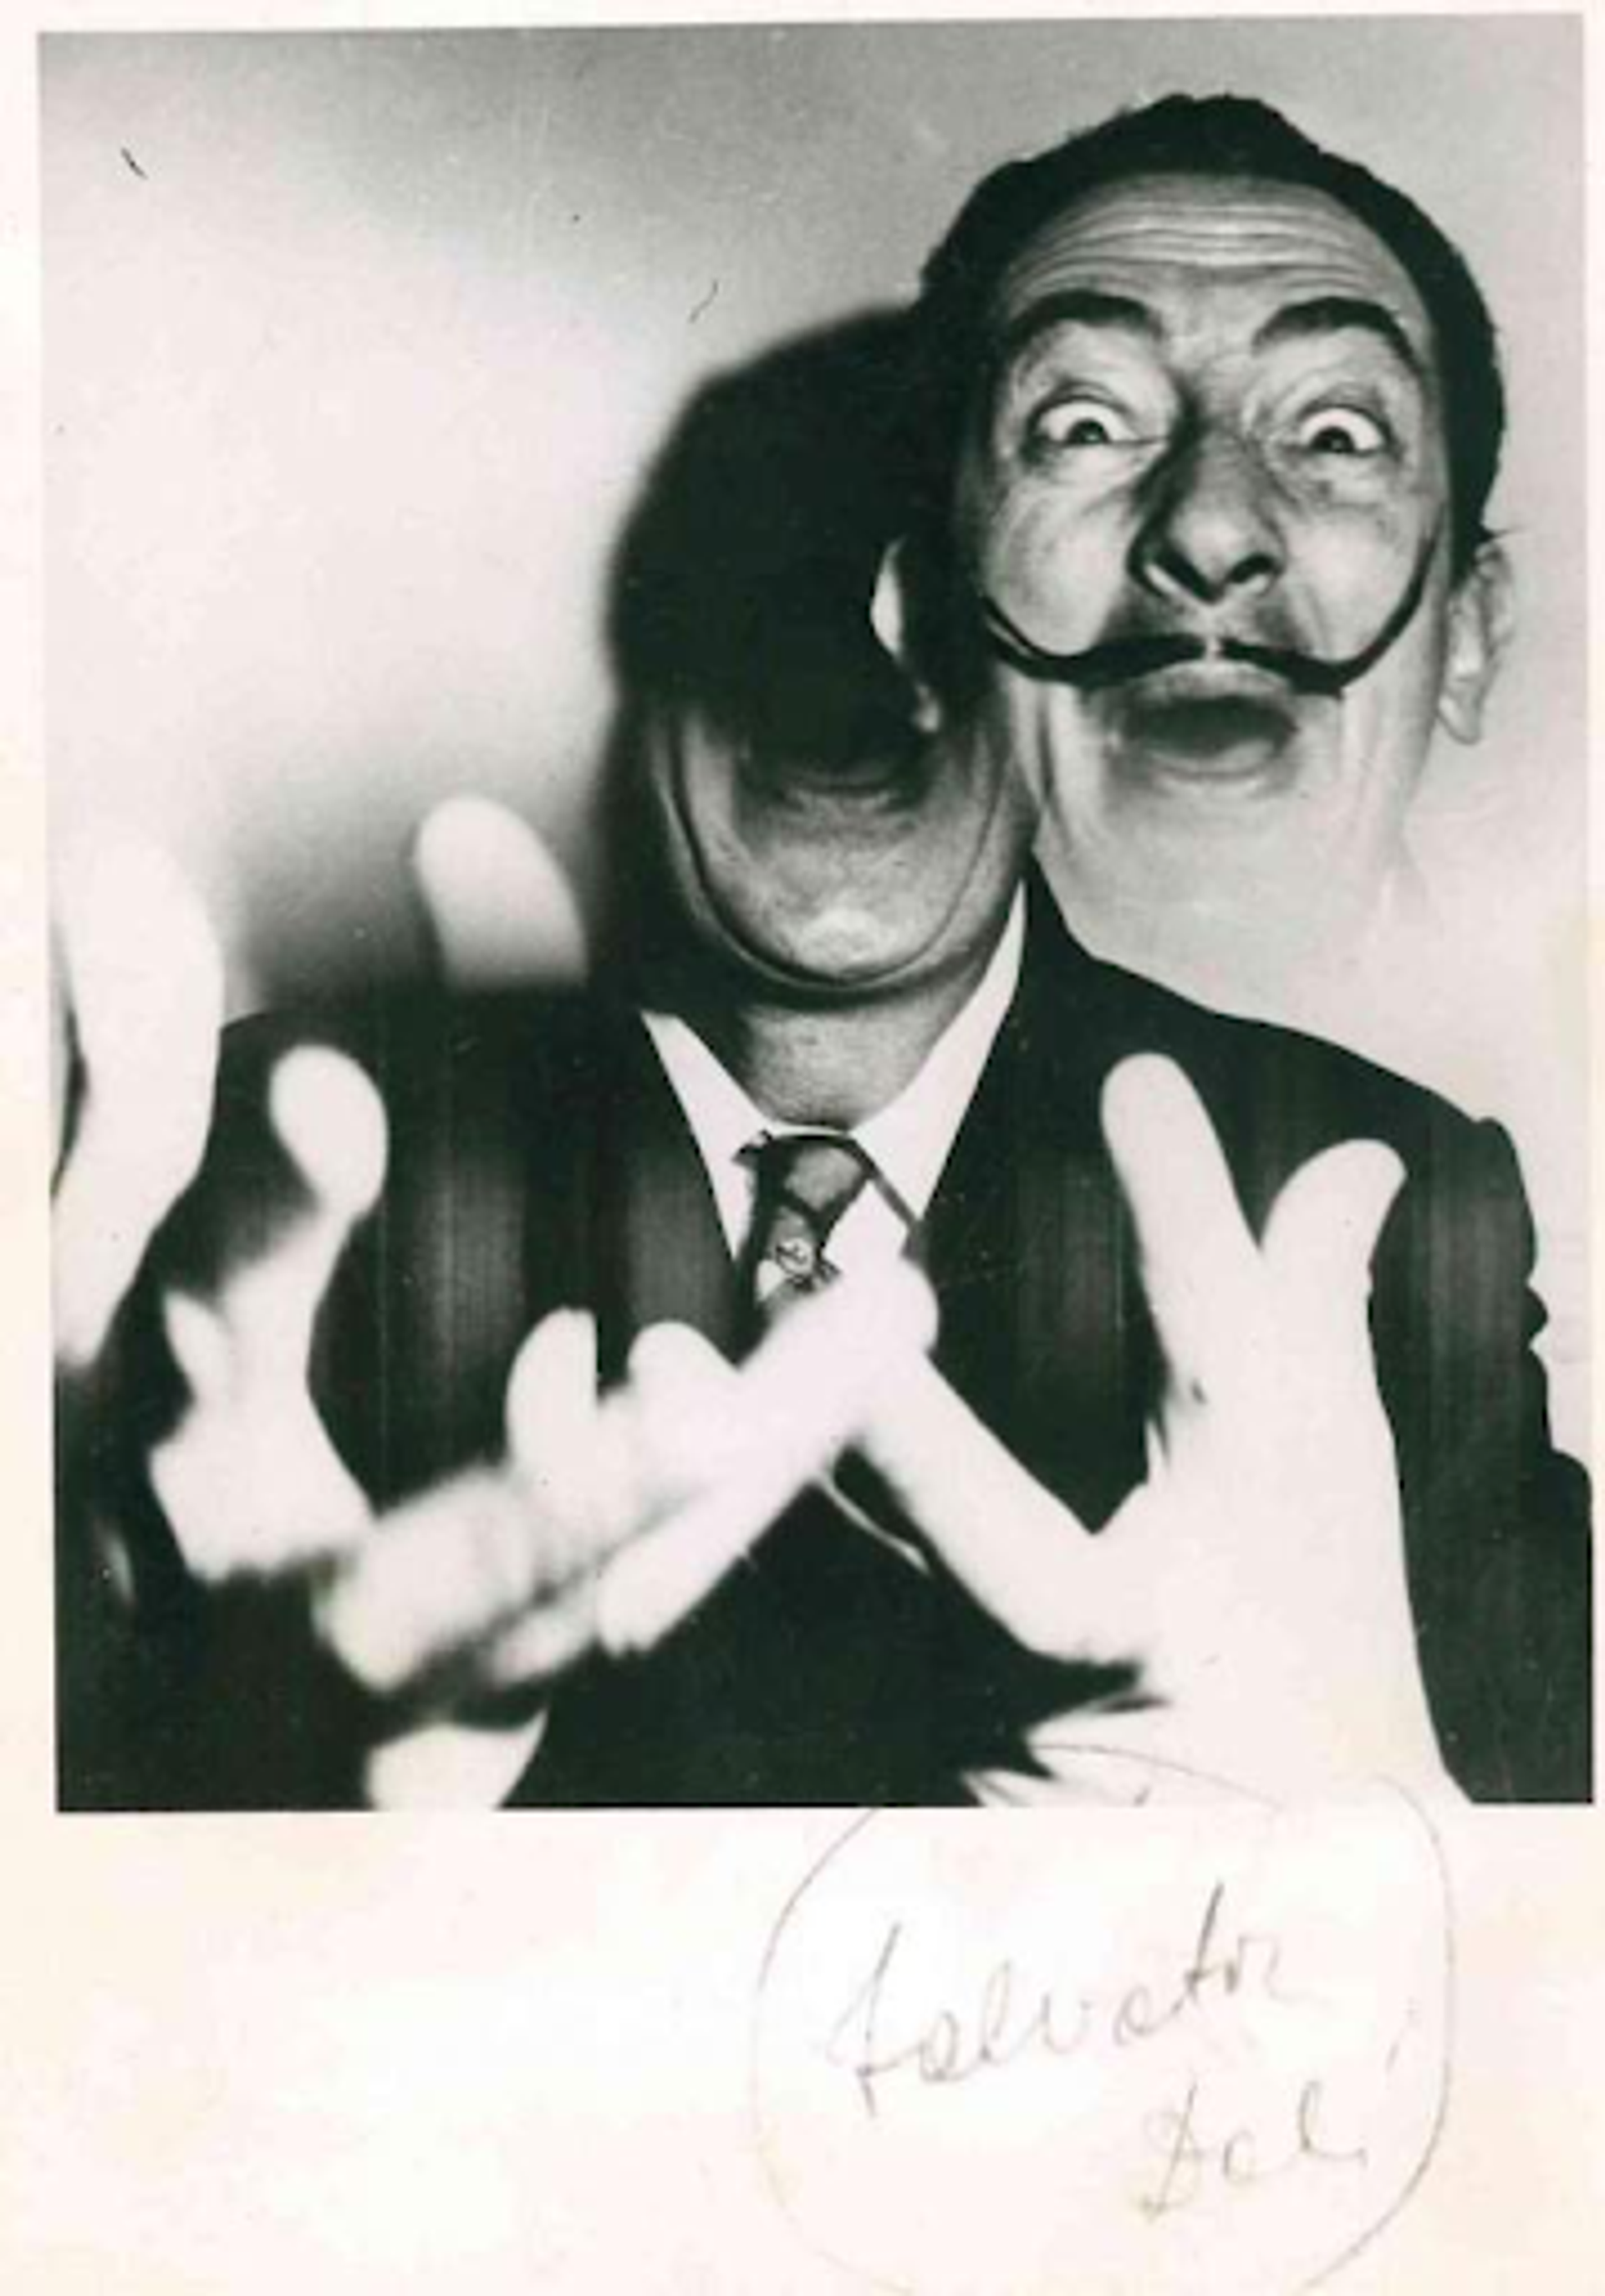 A black and white polaroid photograph; a distorted image of Salvador Dalí.